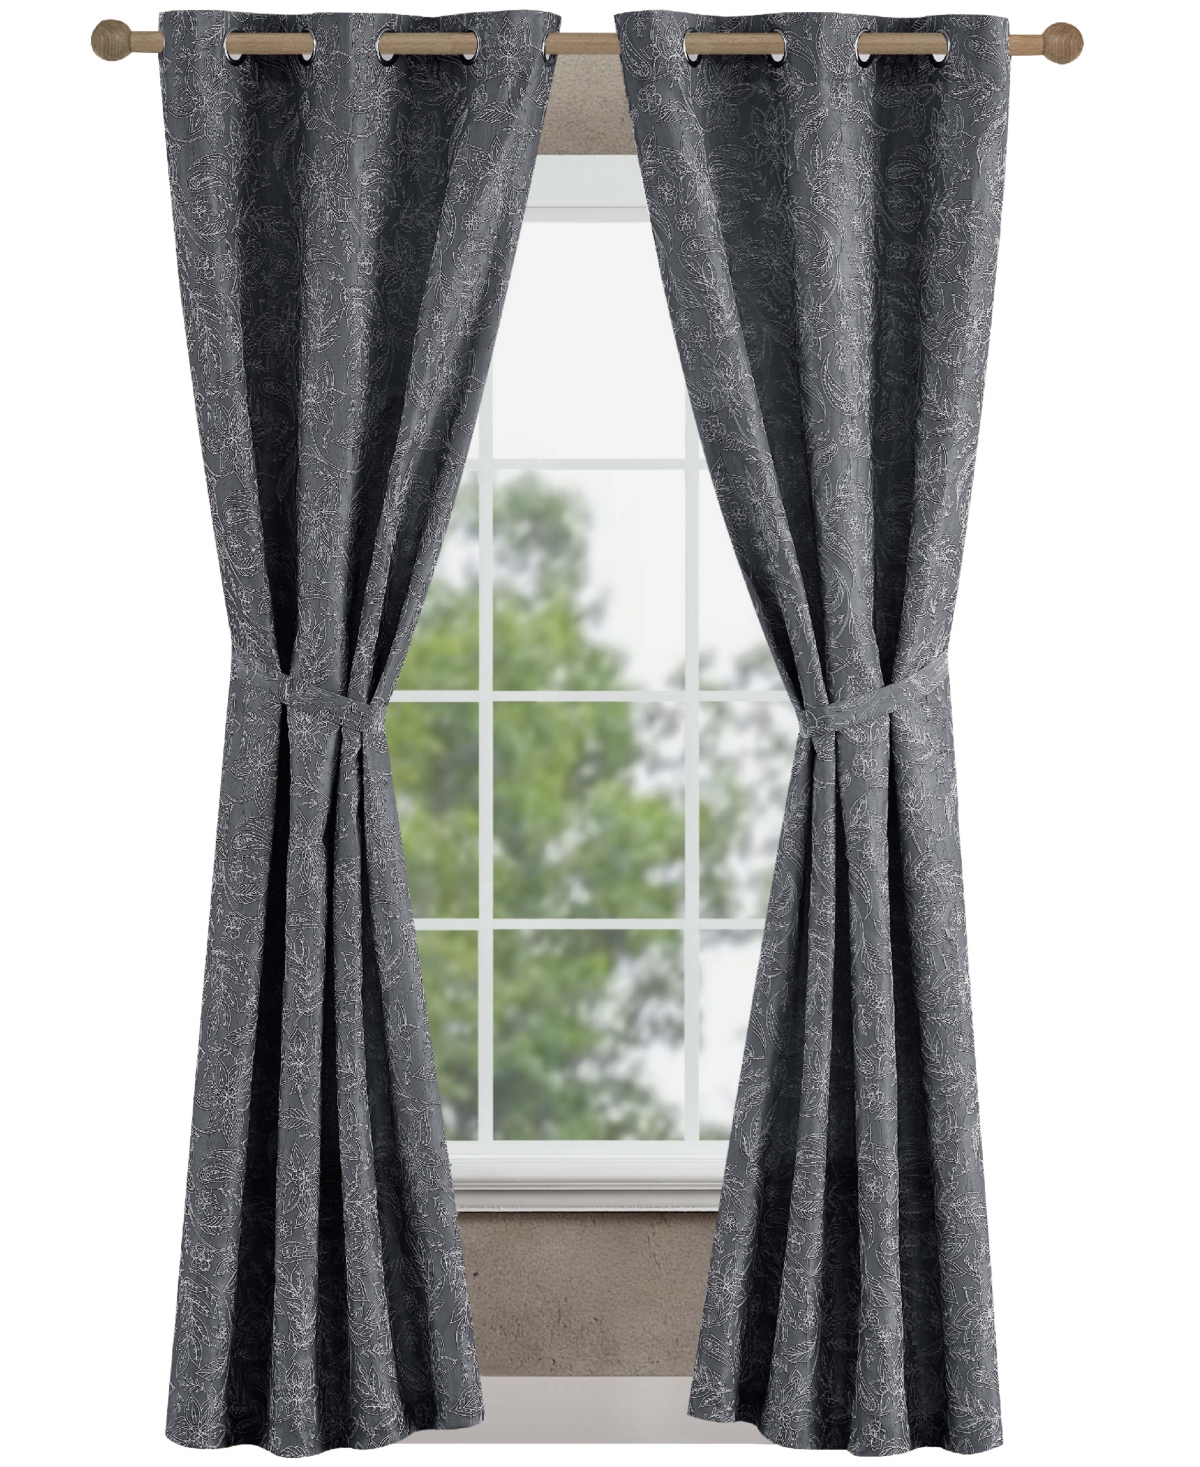 Jessica Simpson Groovy Paisley Textured Blackout Grommet Window Curtain Panel Pair With Tiebacks, 38" X 84" In Gray